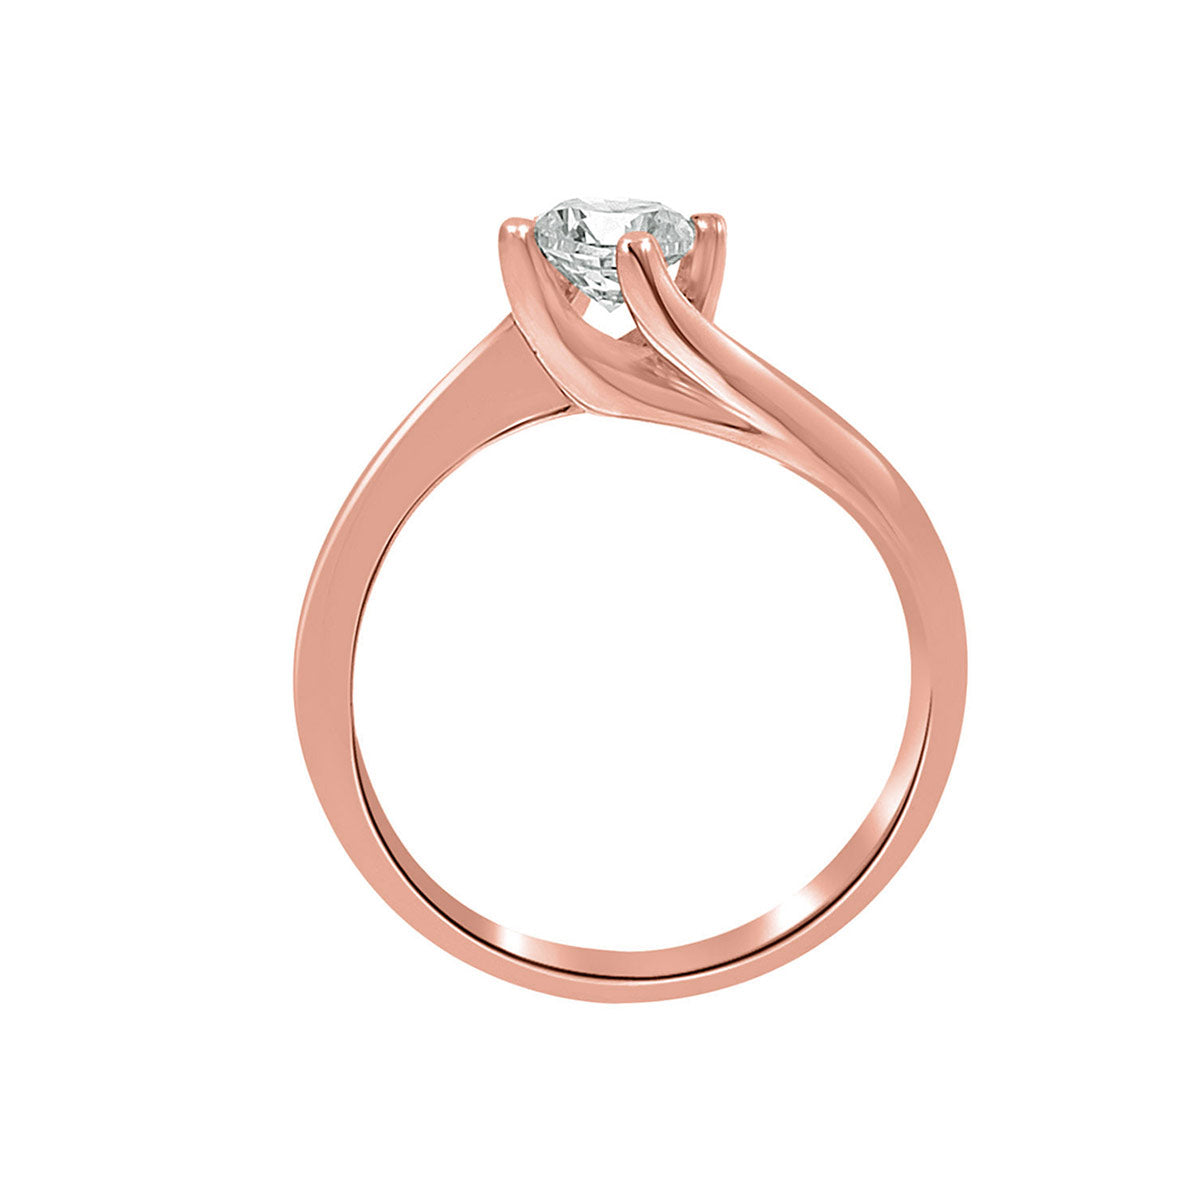 Twisted Band Solitaire Engagement Ring in rose gold standing upright